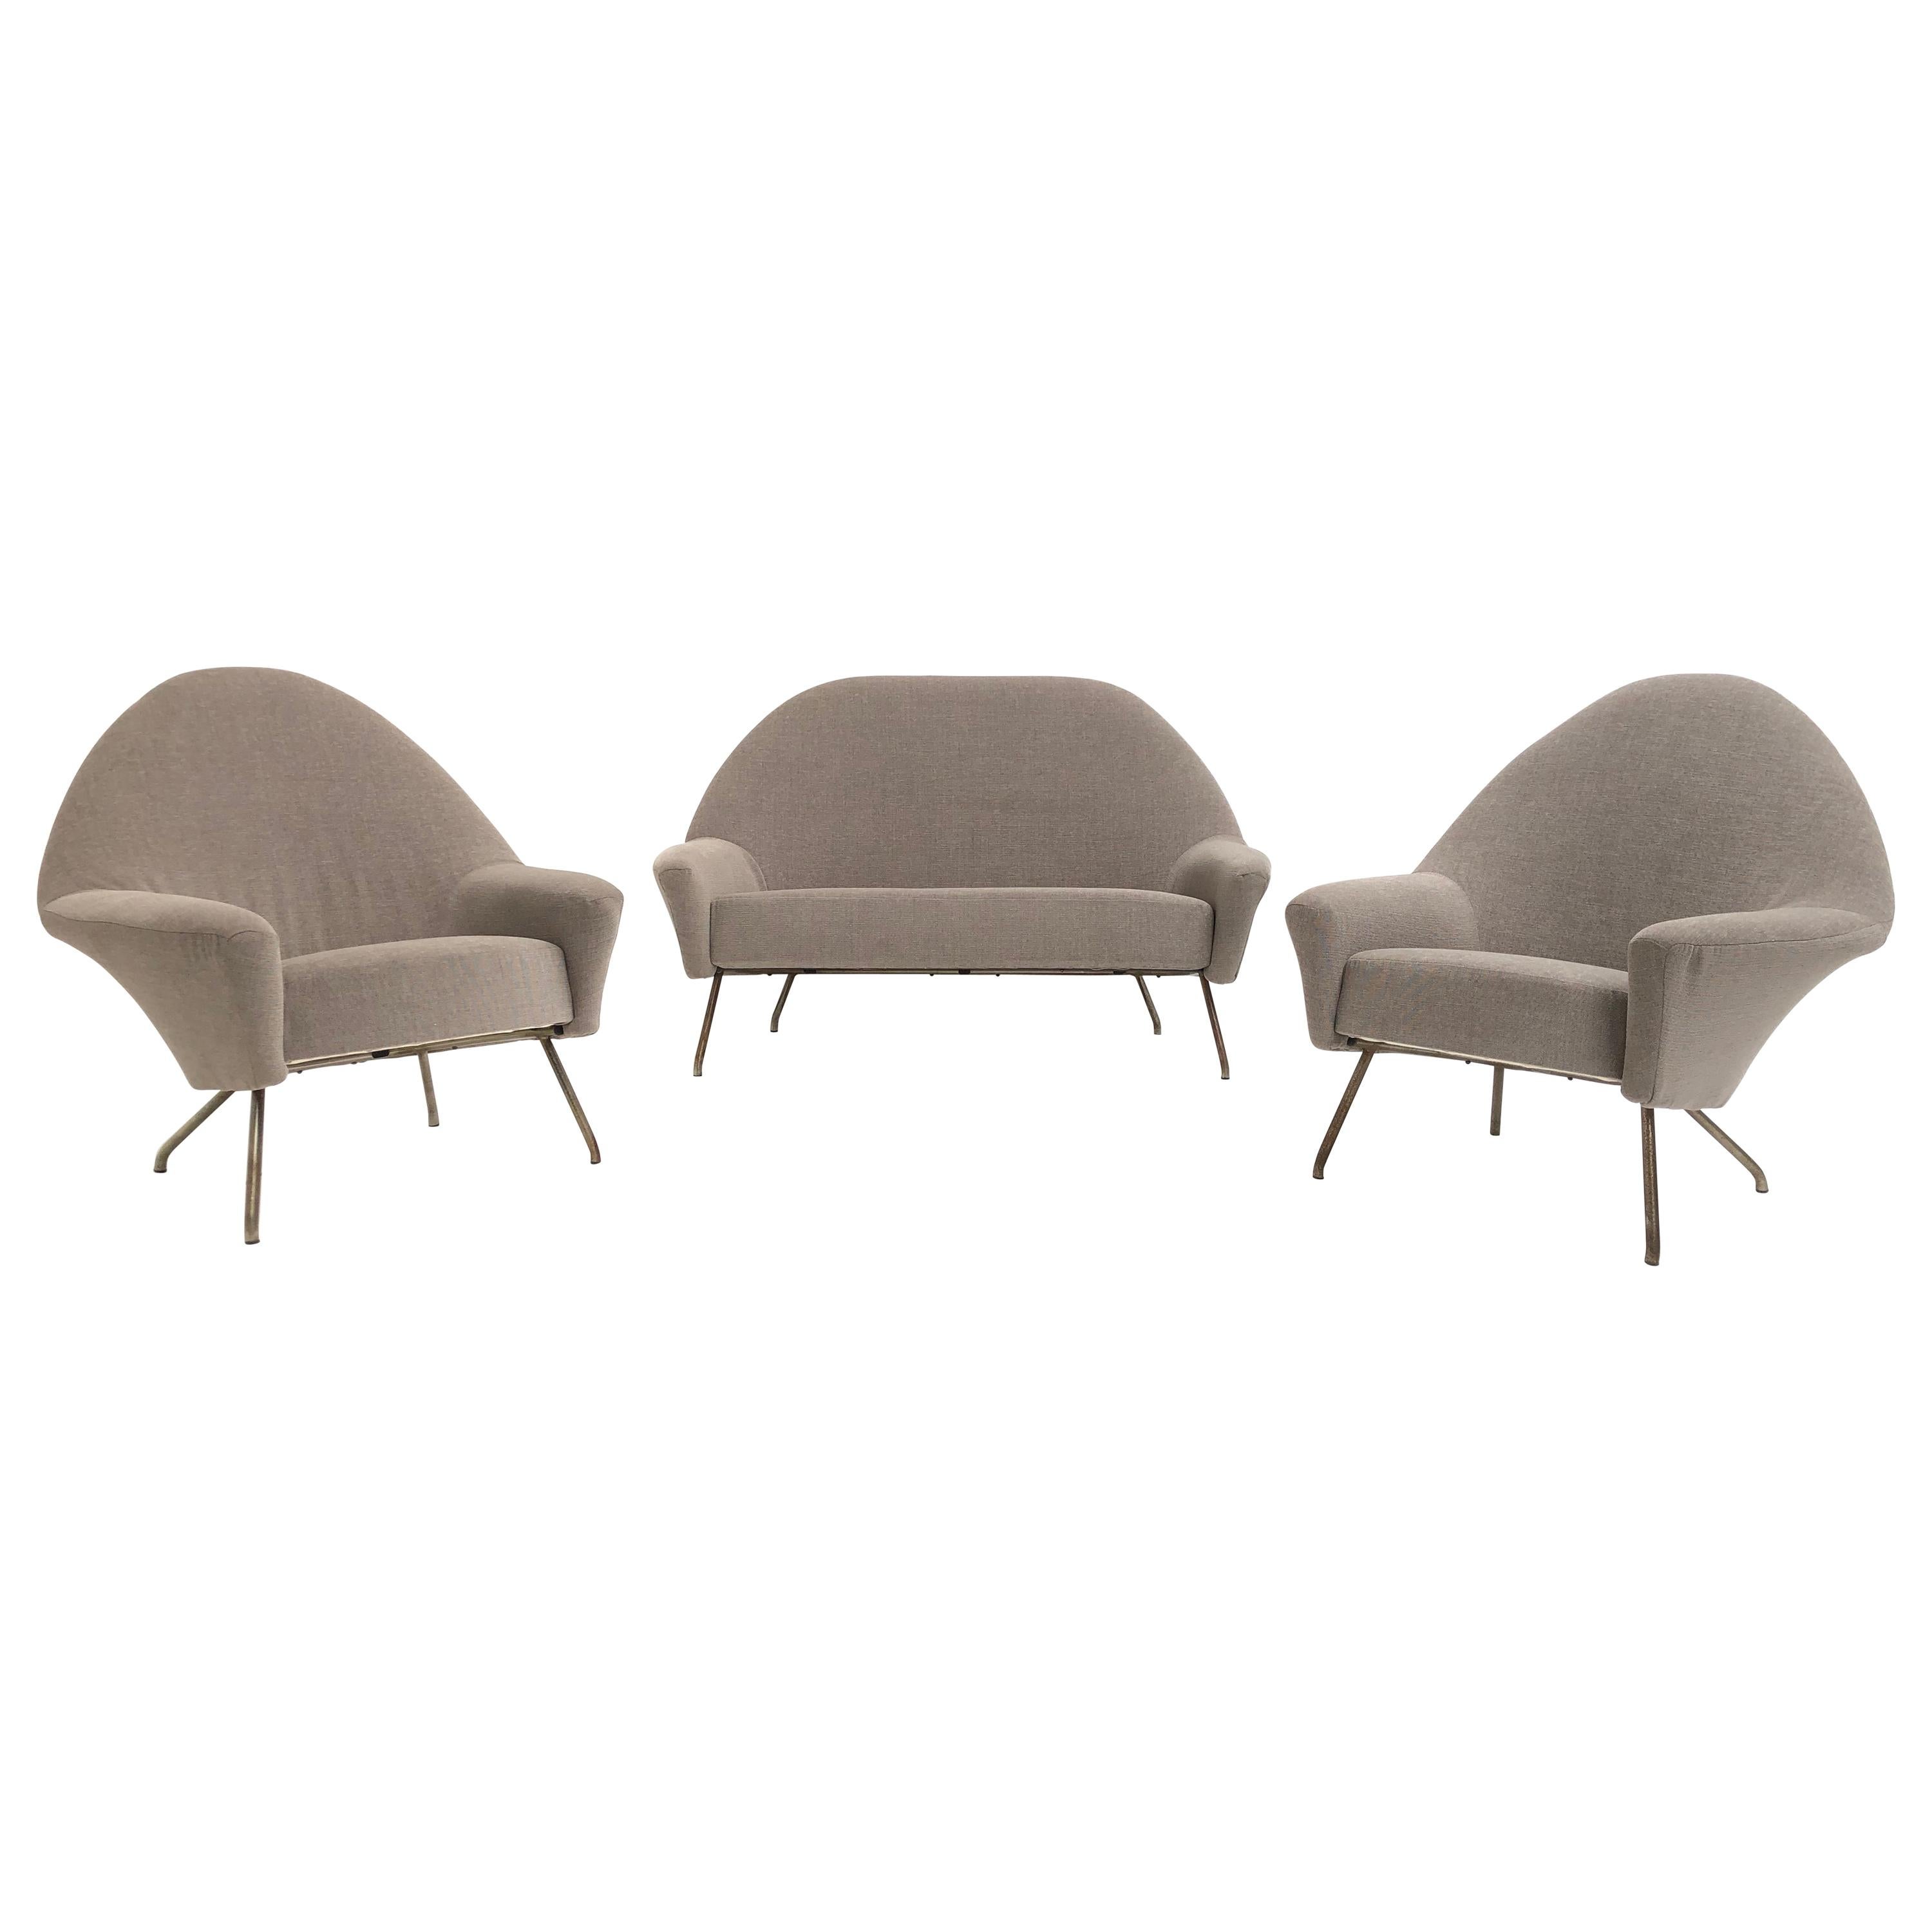 J.A Motte '770' lounge set comprising pair lounge chairs & sofa, 1958, Restored